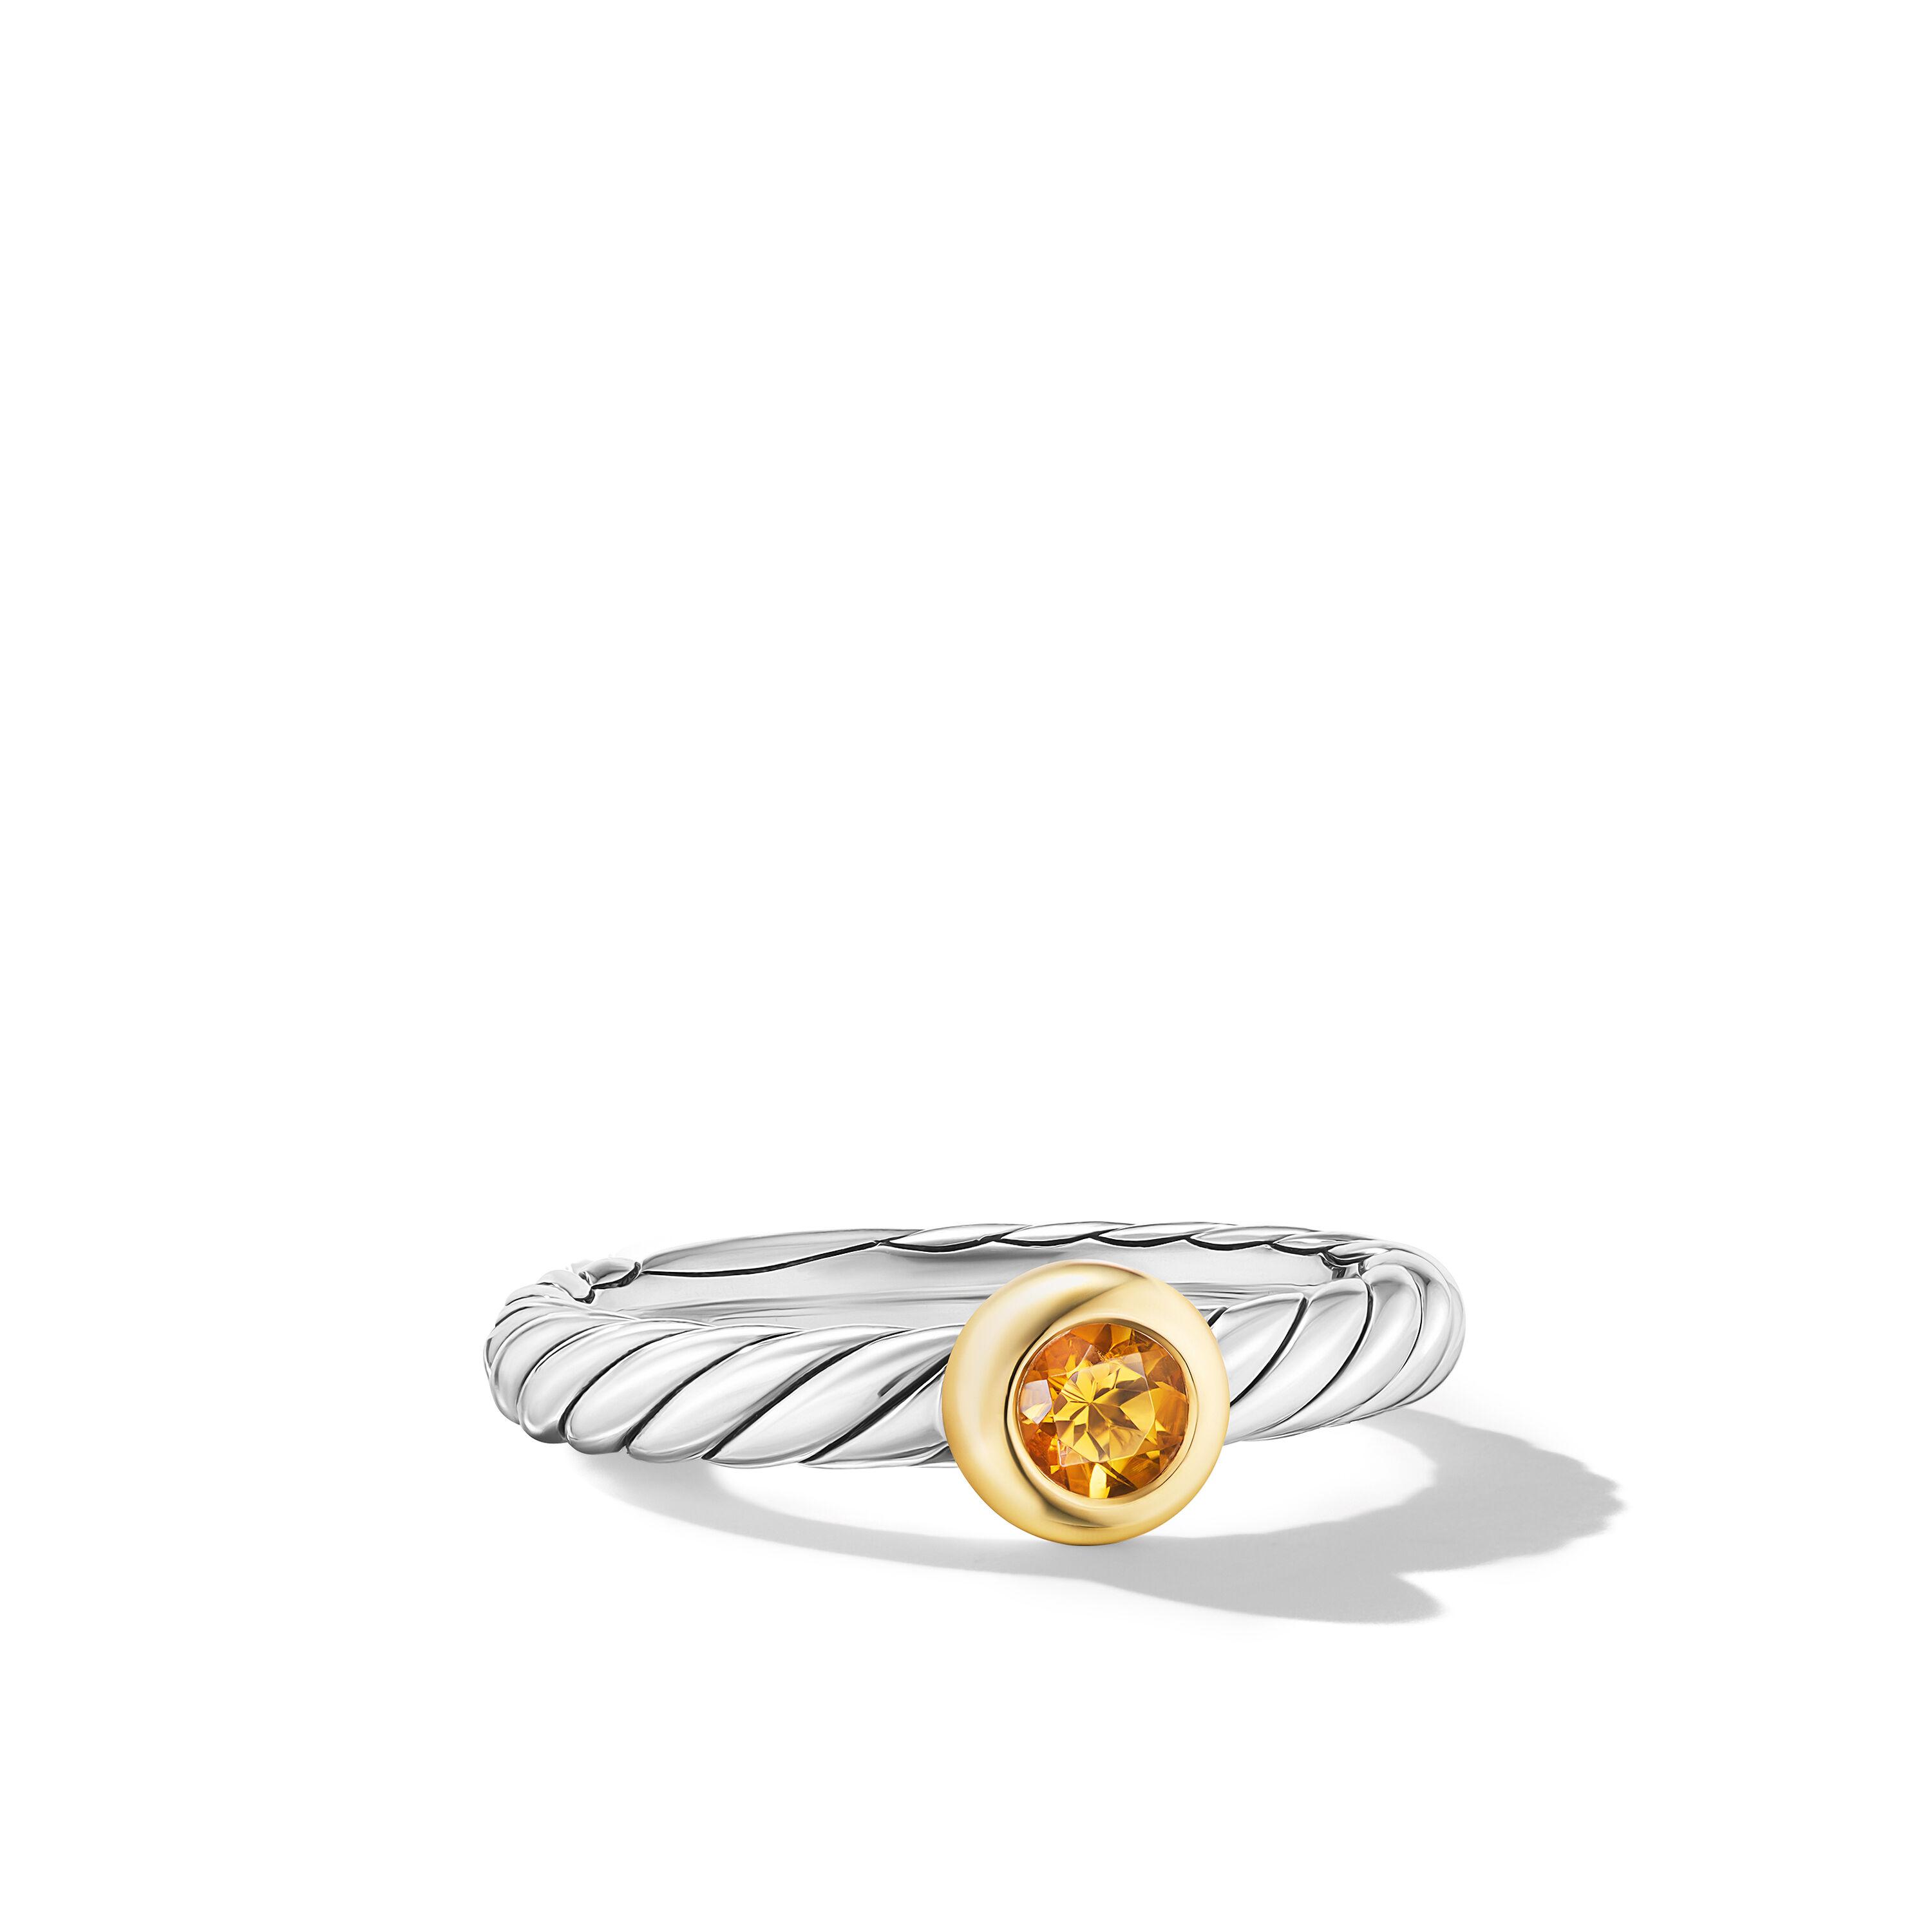 David Yurman Petite Cable Ring in Sterling Silver with 14K Yellow Gold and Citrine, Size 6